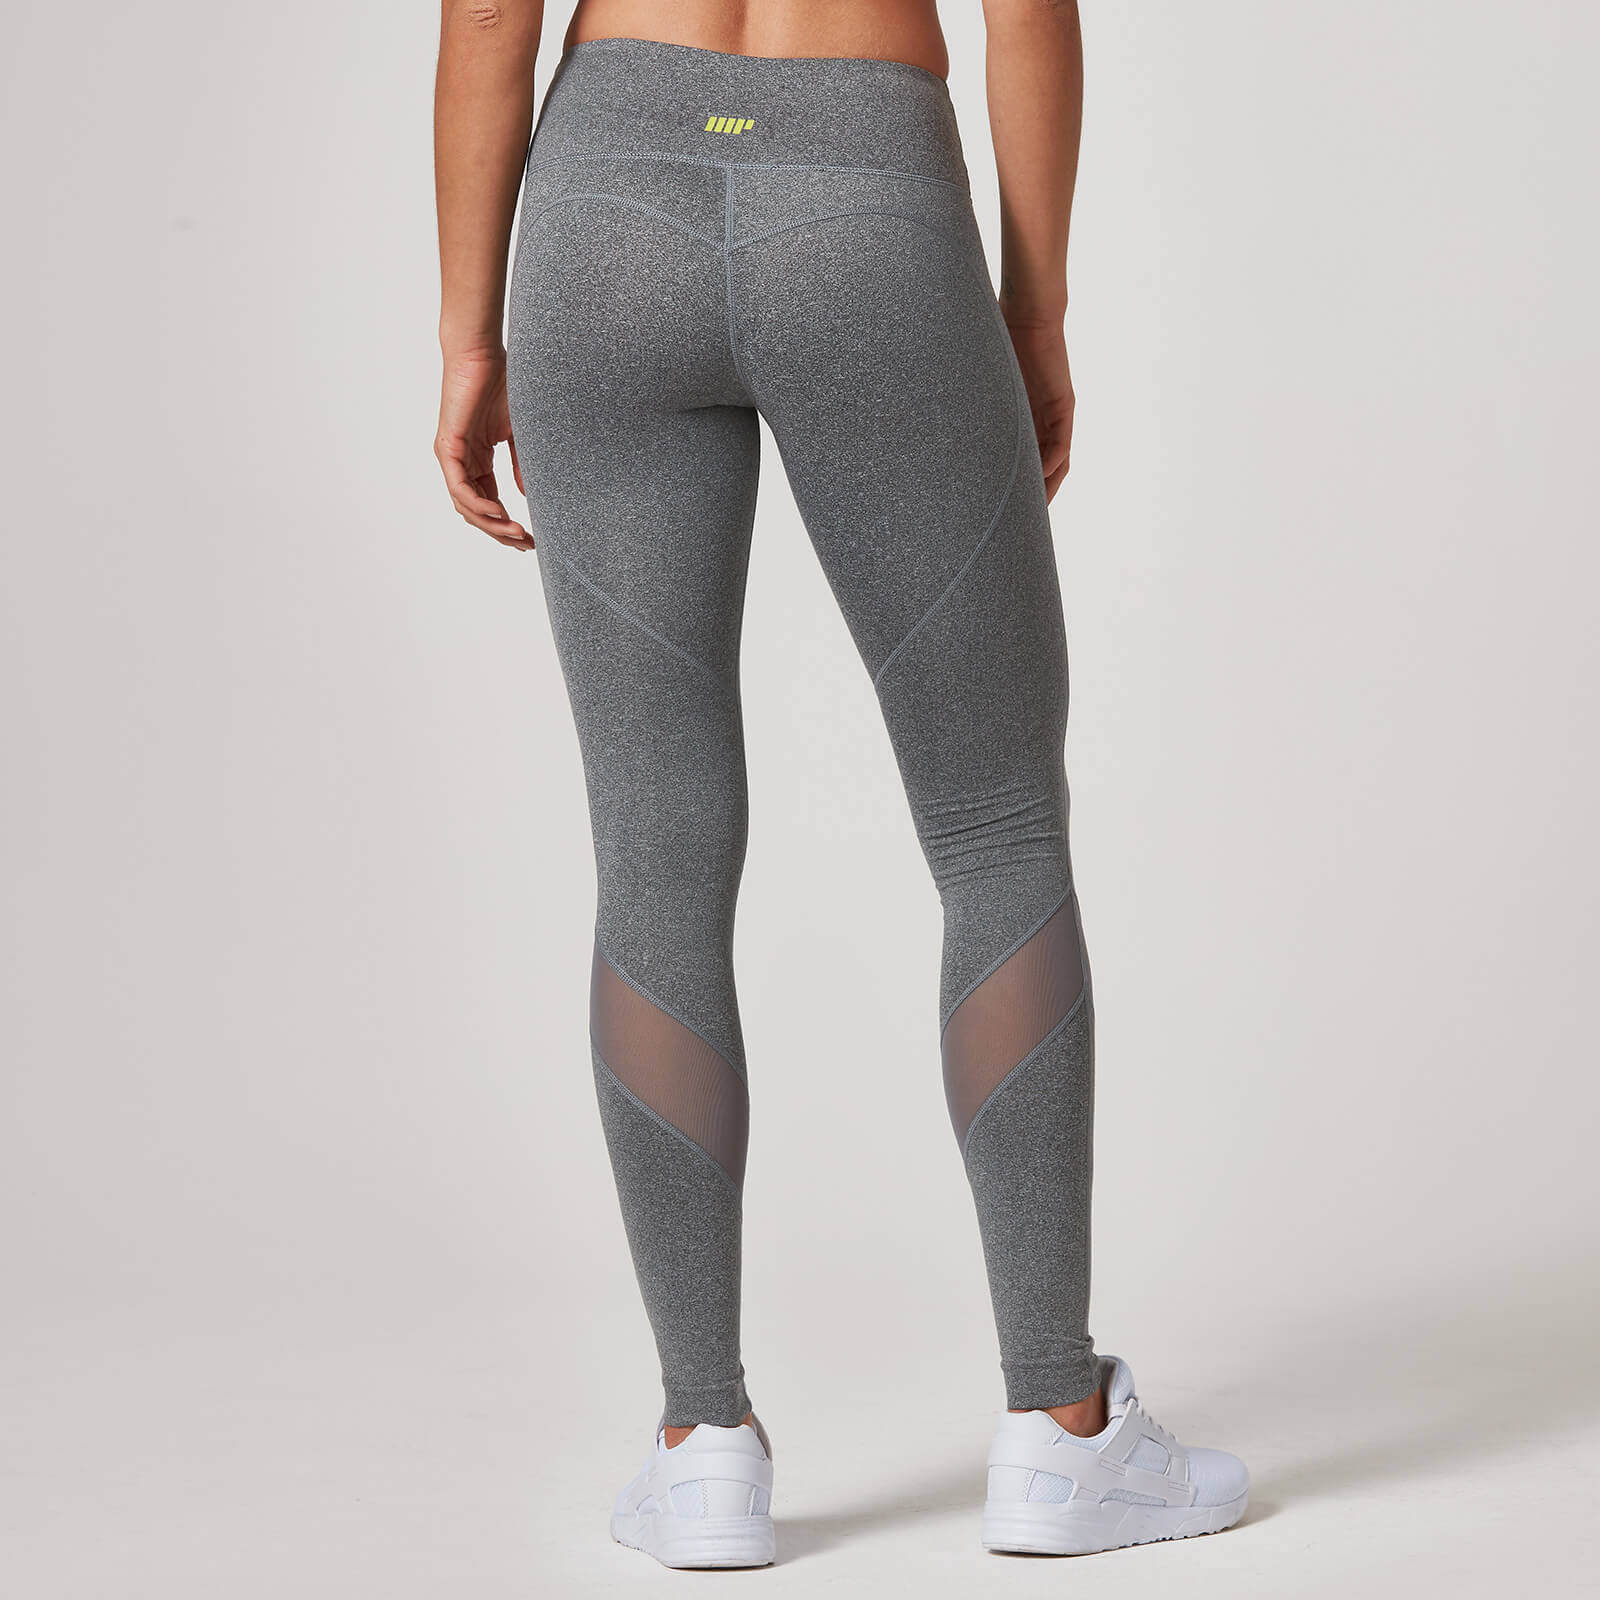 Best Sculpting leggings To Show Off Your Amazing Butt